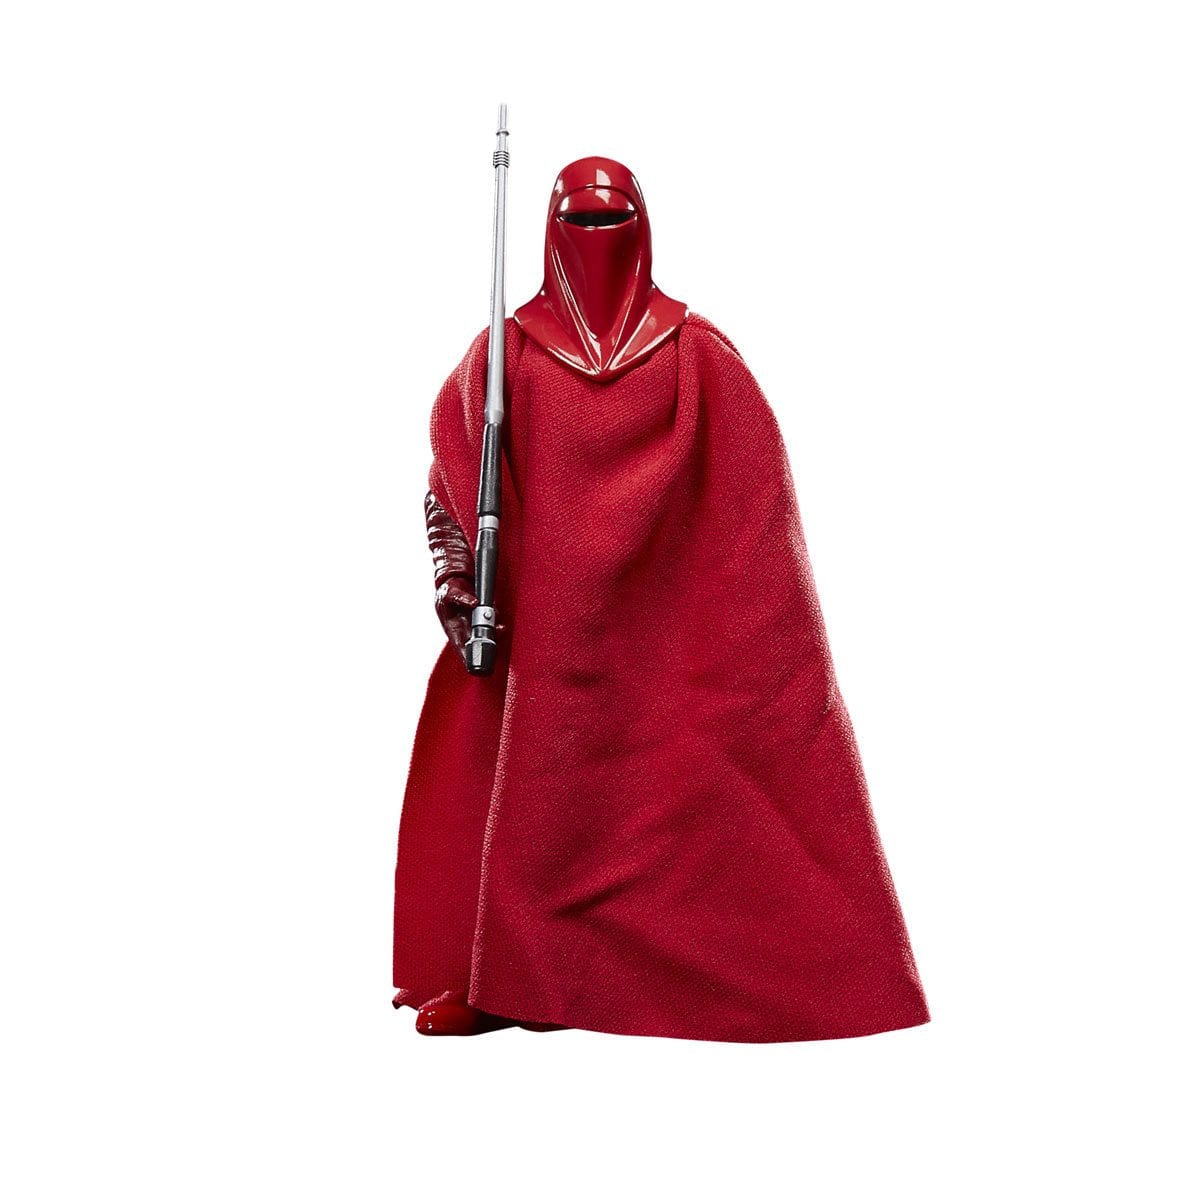 Star Wars The Black Series Return of the Jedi 40th Anniversary 6-Inch Emperor's Royal Guard Action Figure